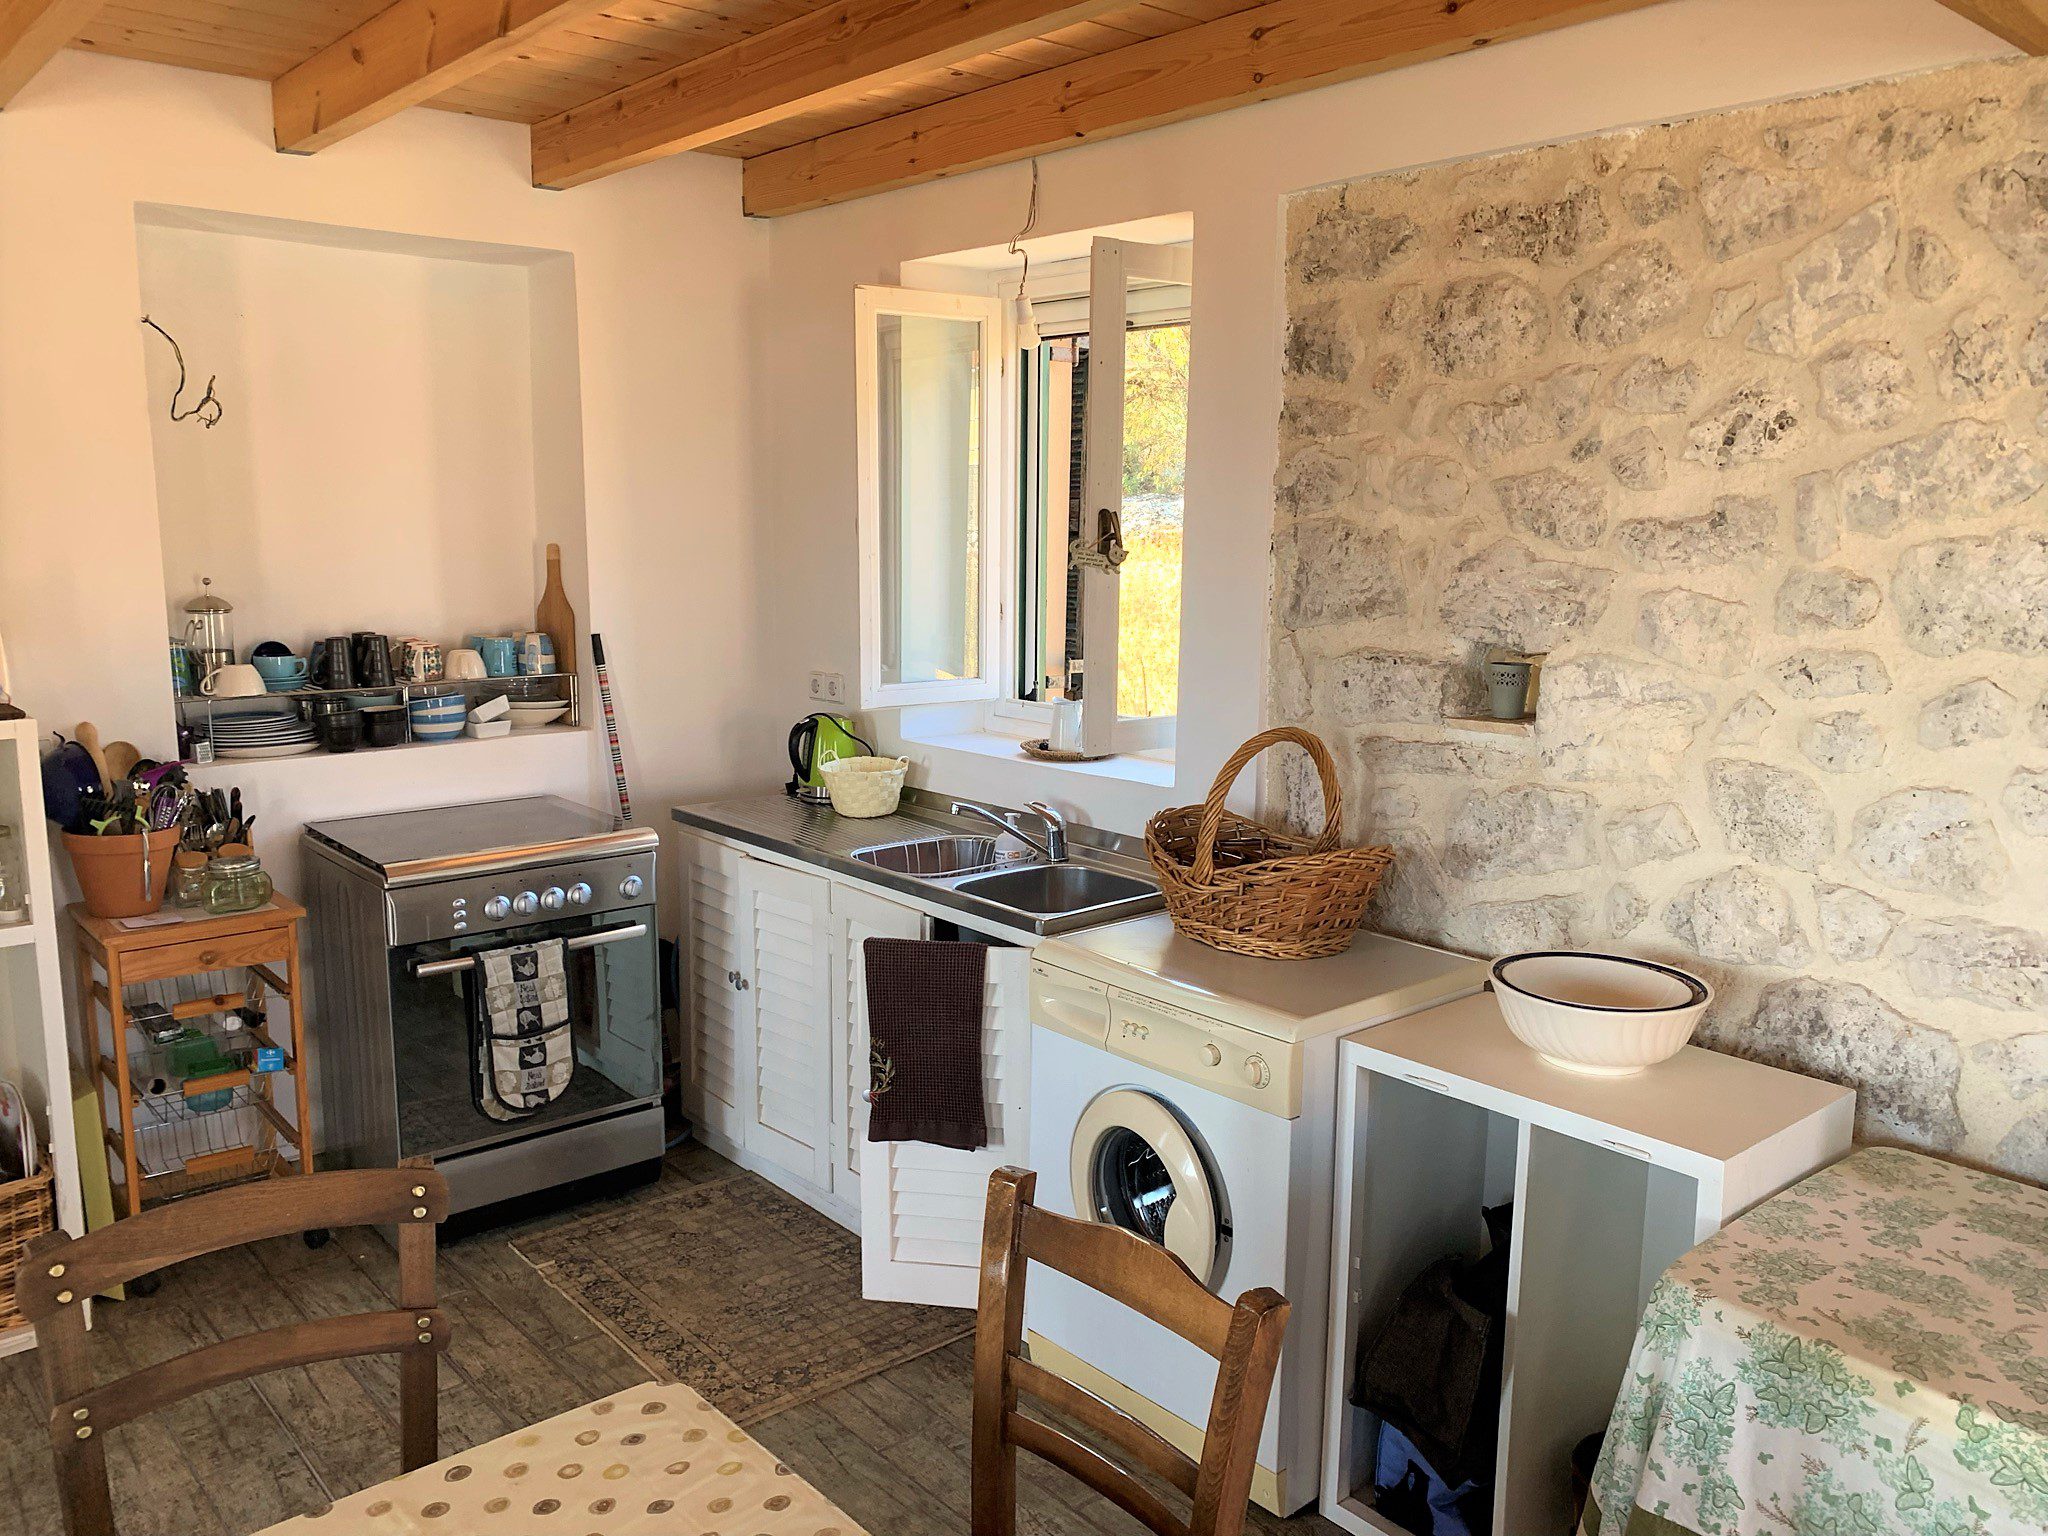 Kitchen of house for sale Ithaca Greece, Anoghi